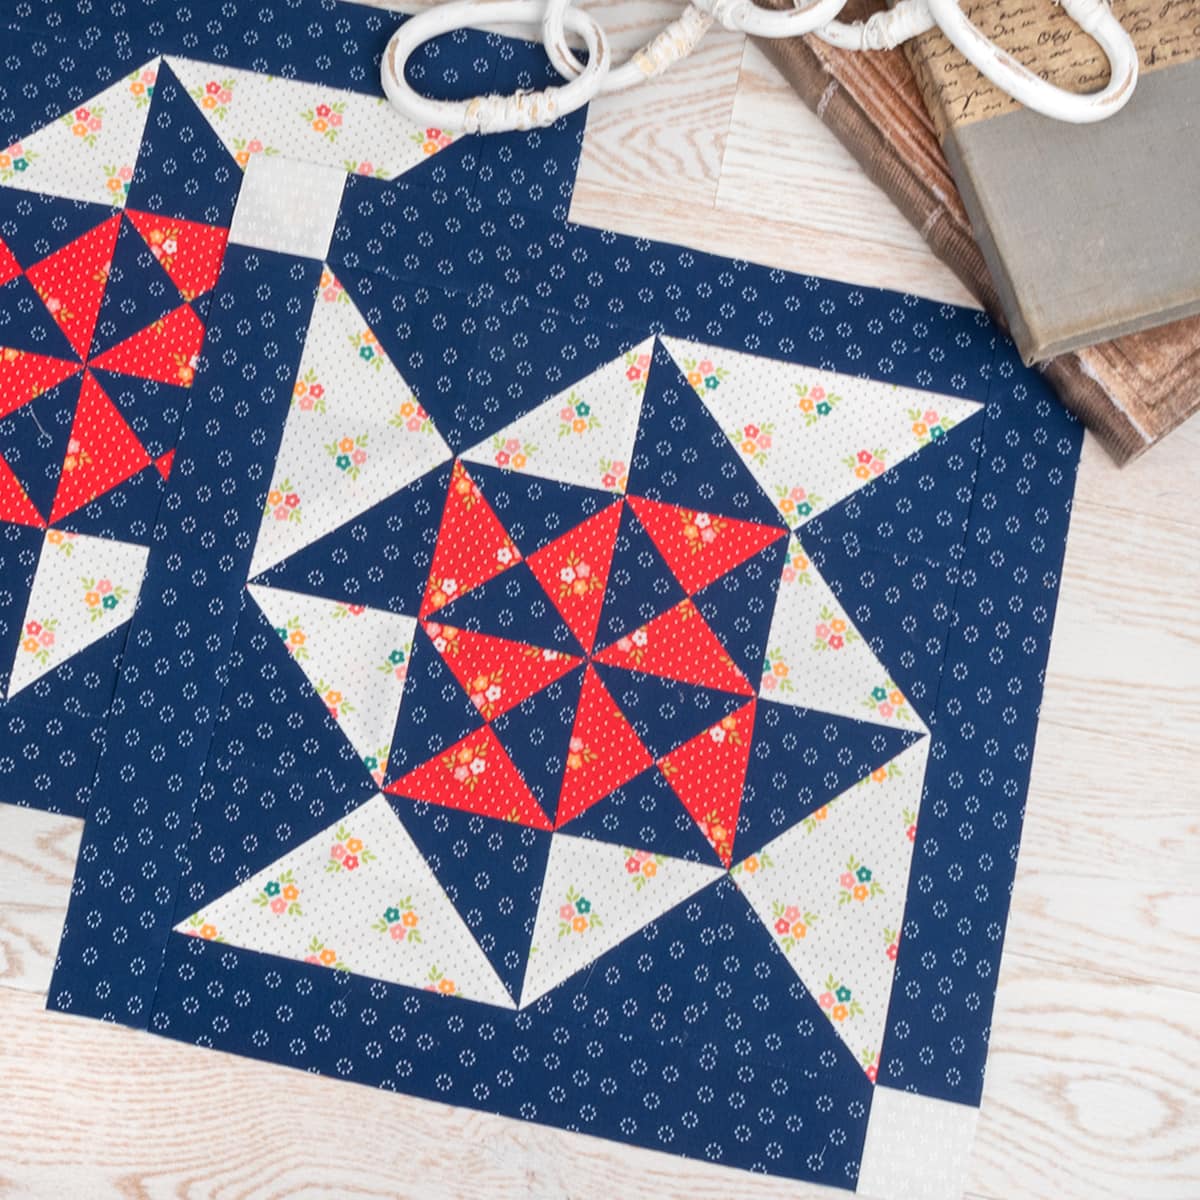 Announcing the Moonbeams Charity Quilt Along - The Jolly Jabber